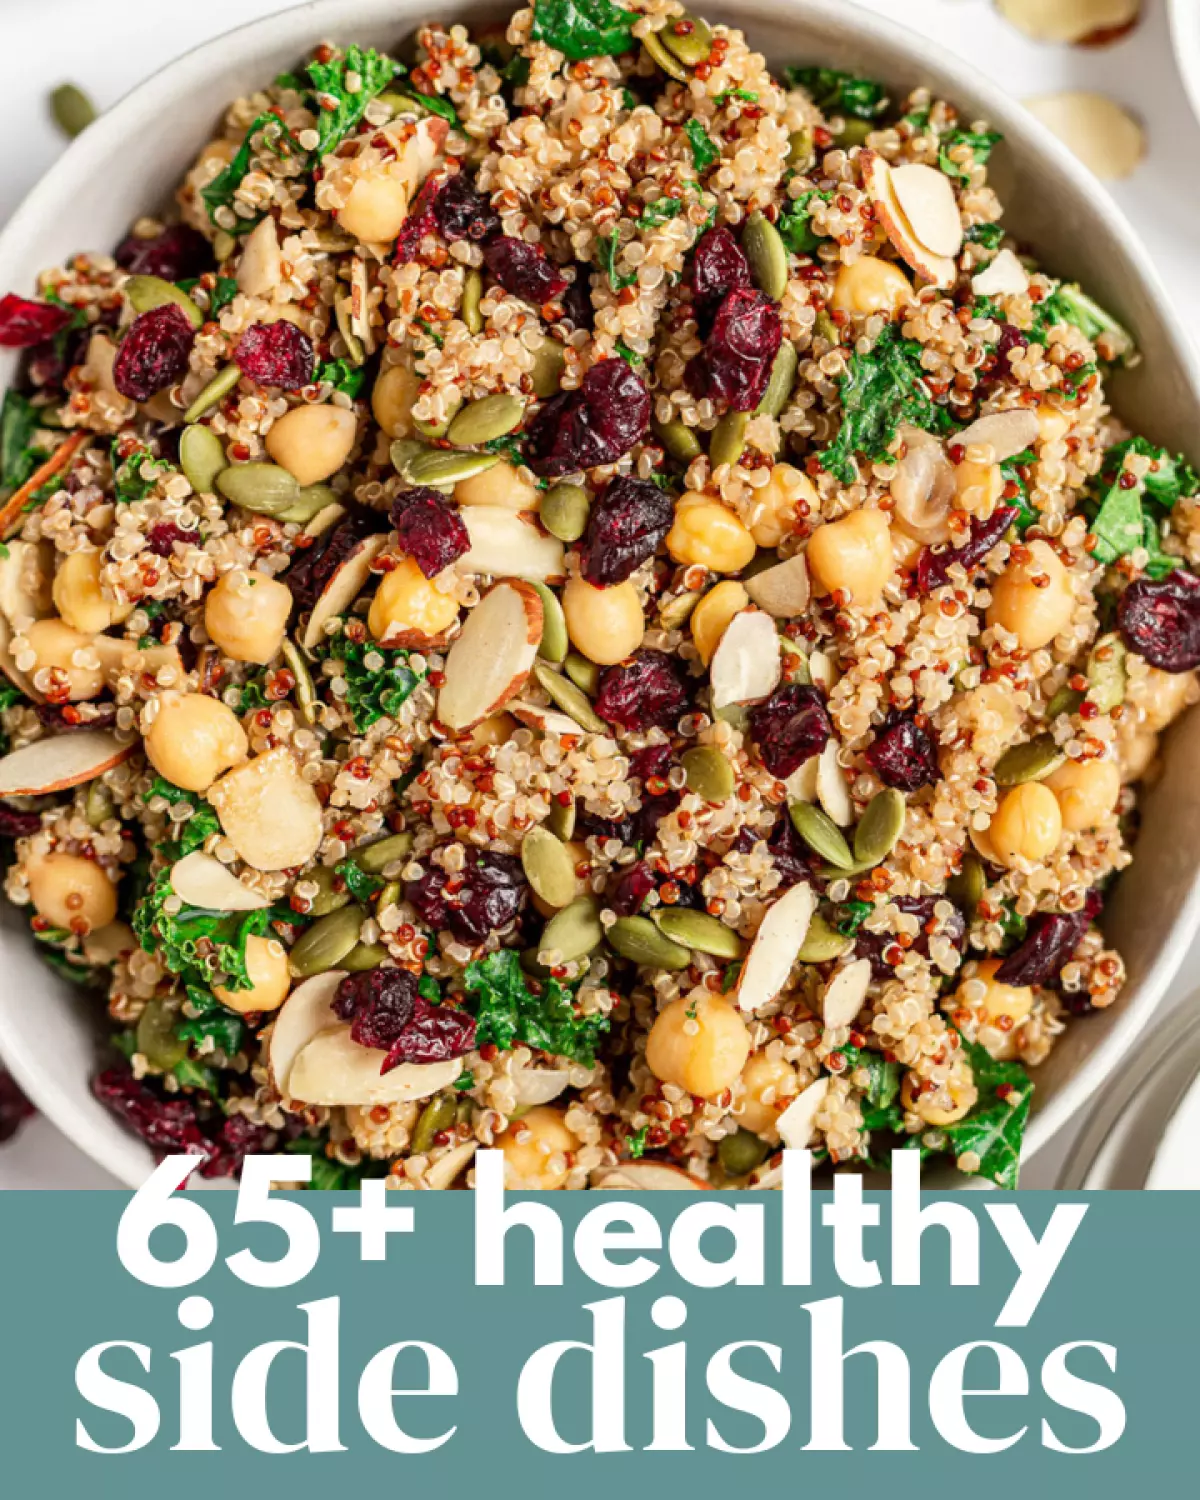 65+ Healthy Side Dishes